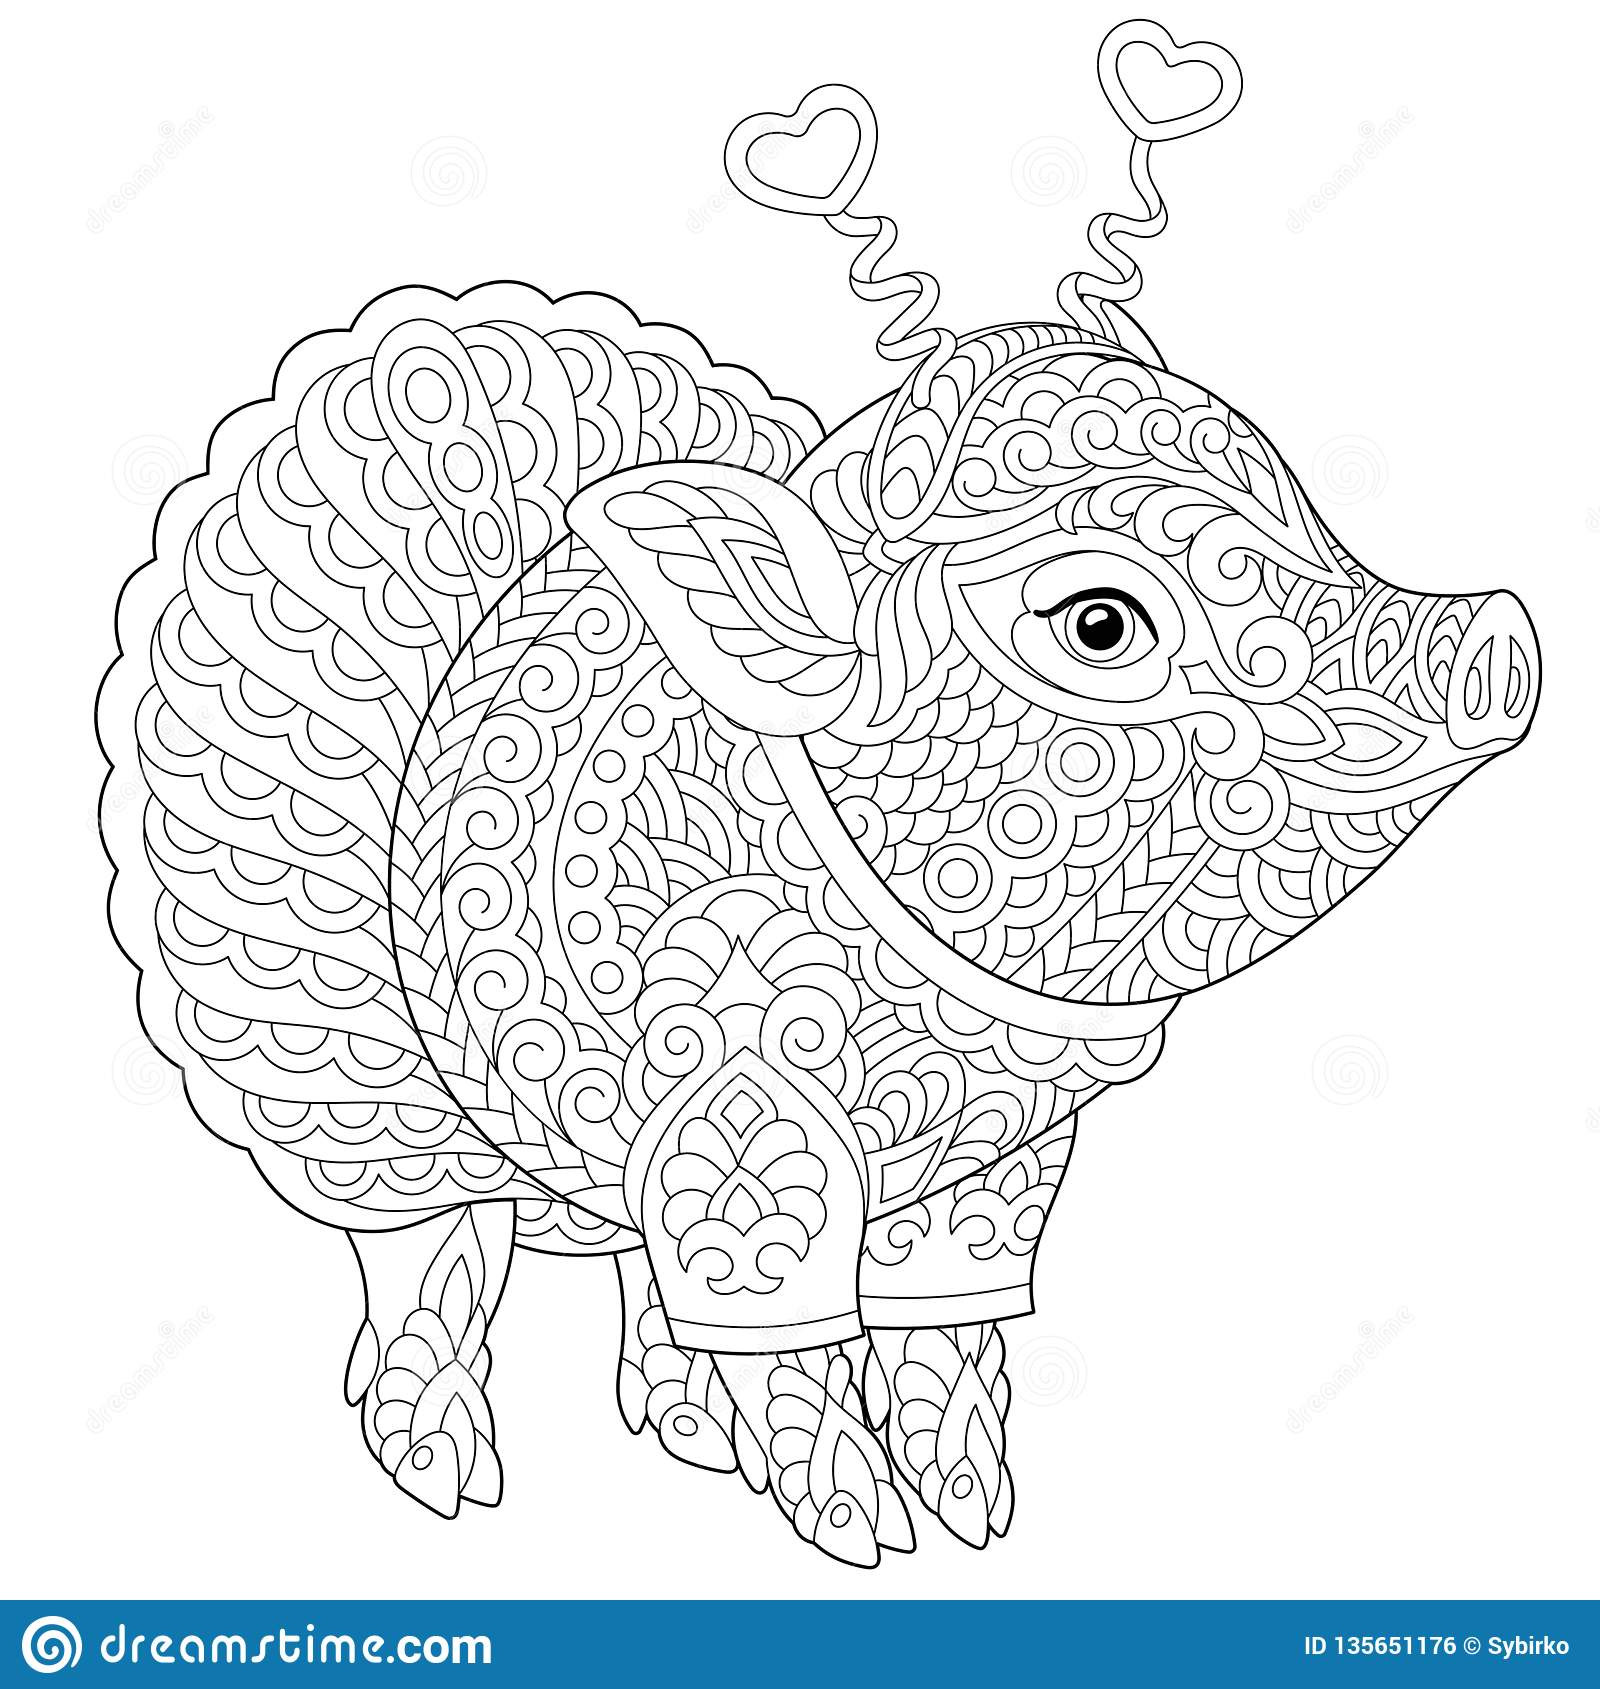 Pig Coloring Pages For Adults
 Zentangle Pig Piggy Coloring Page Stock Vector